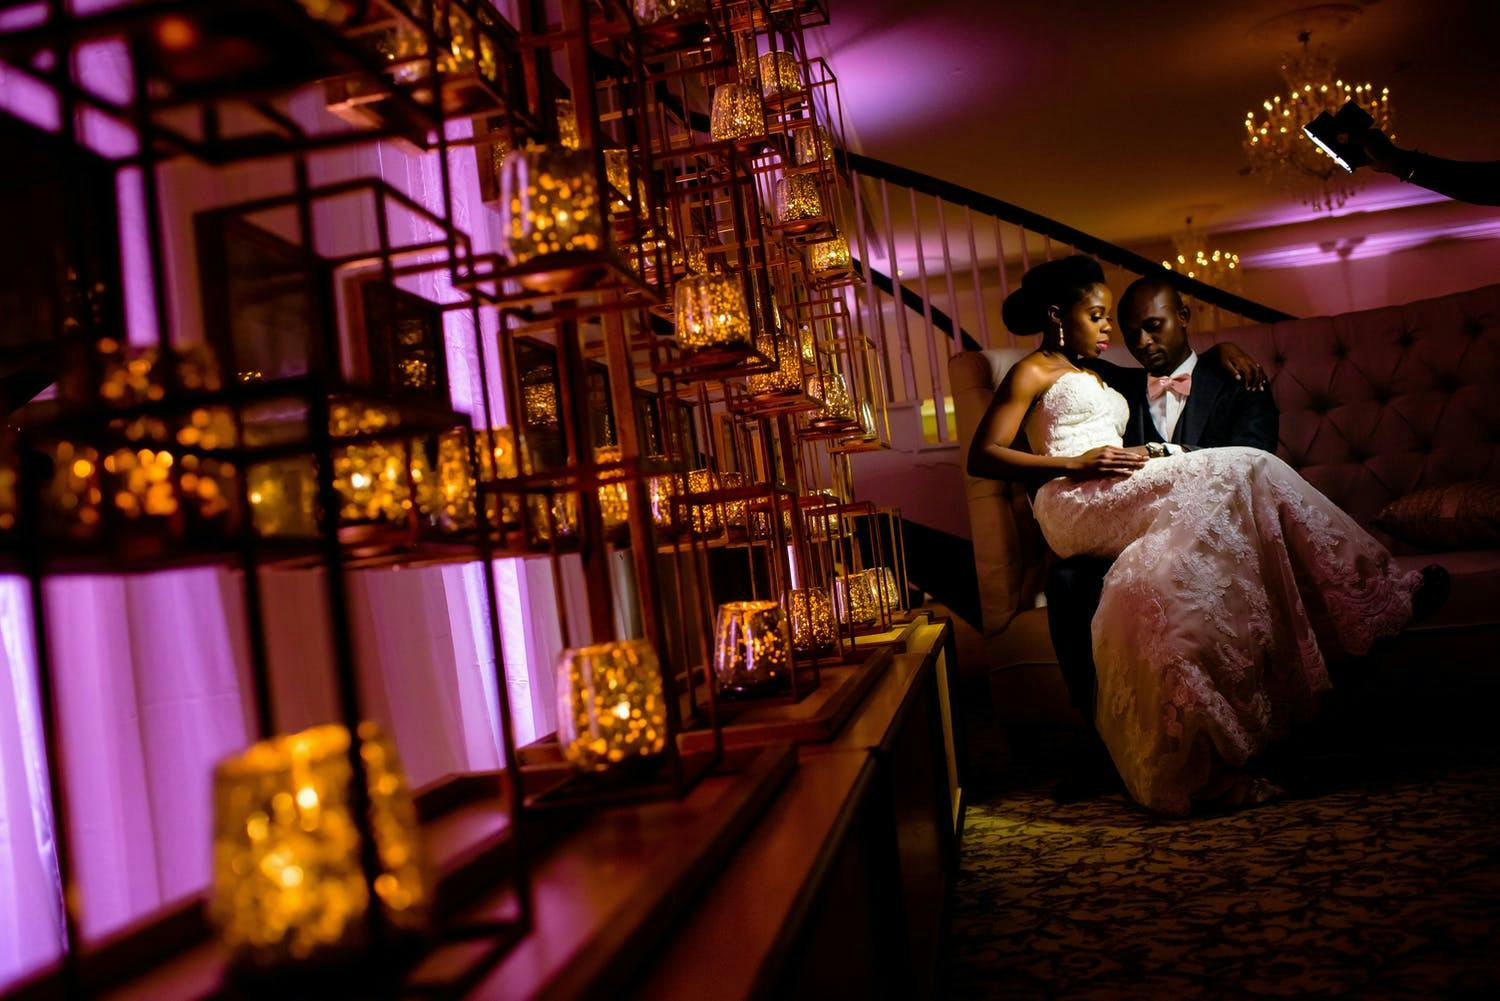 Wedding With Open Shelving With Amber Candles Against Purple Uplit Wall